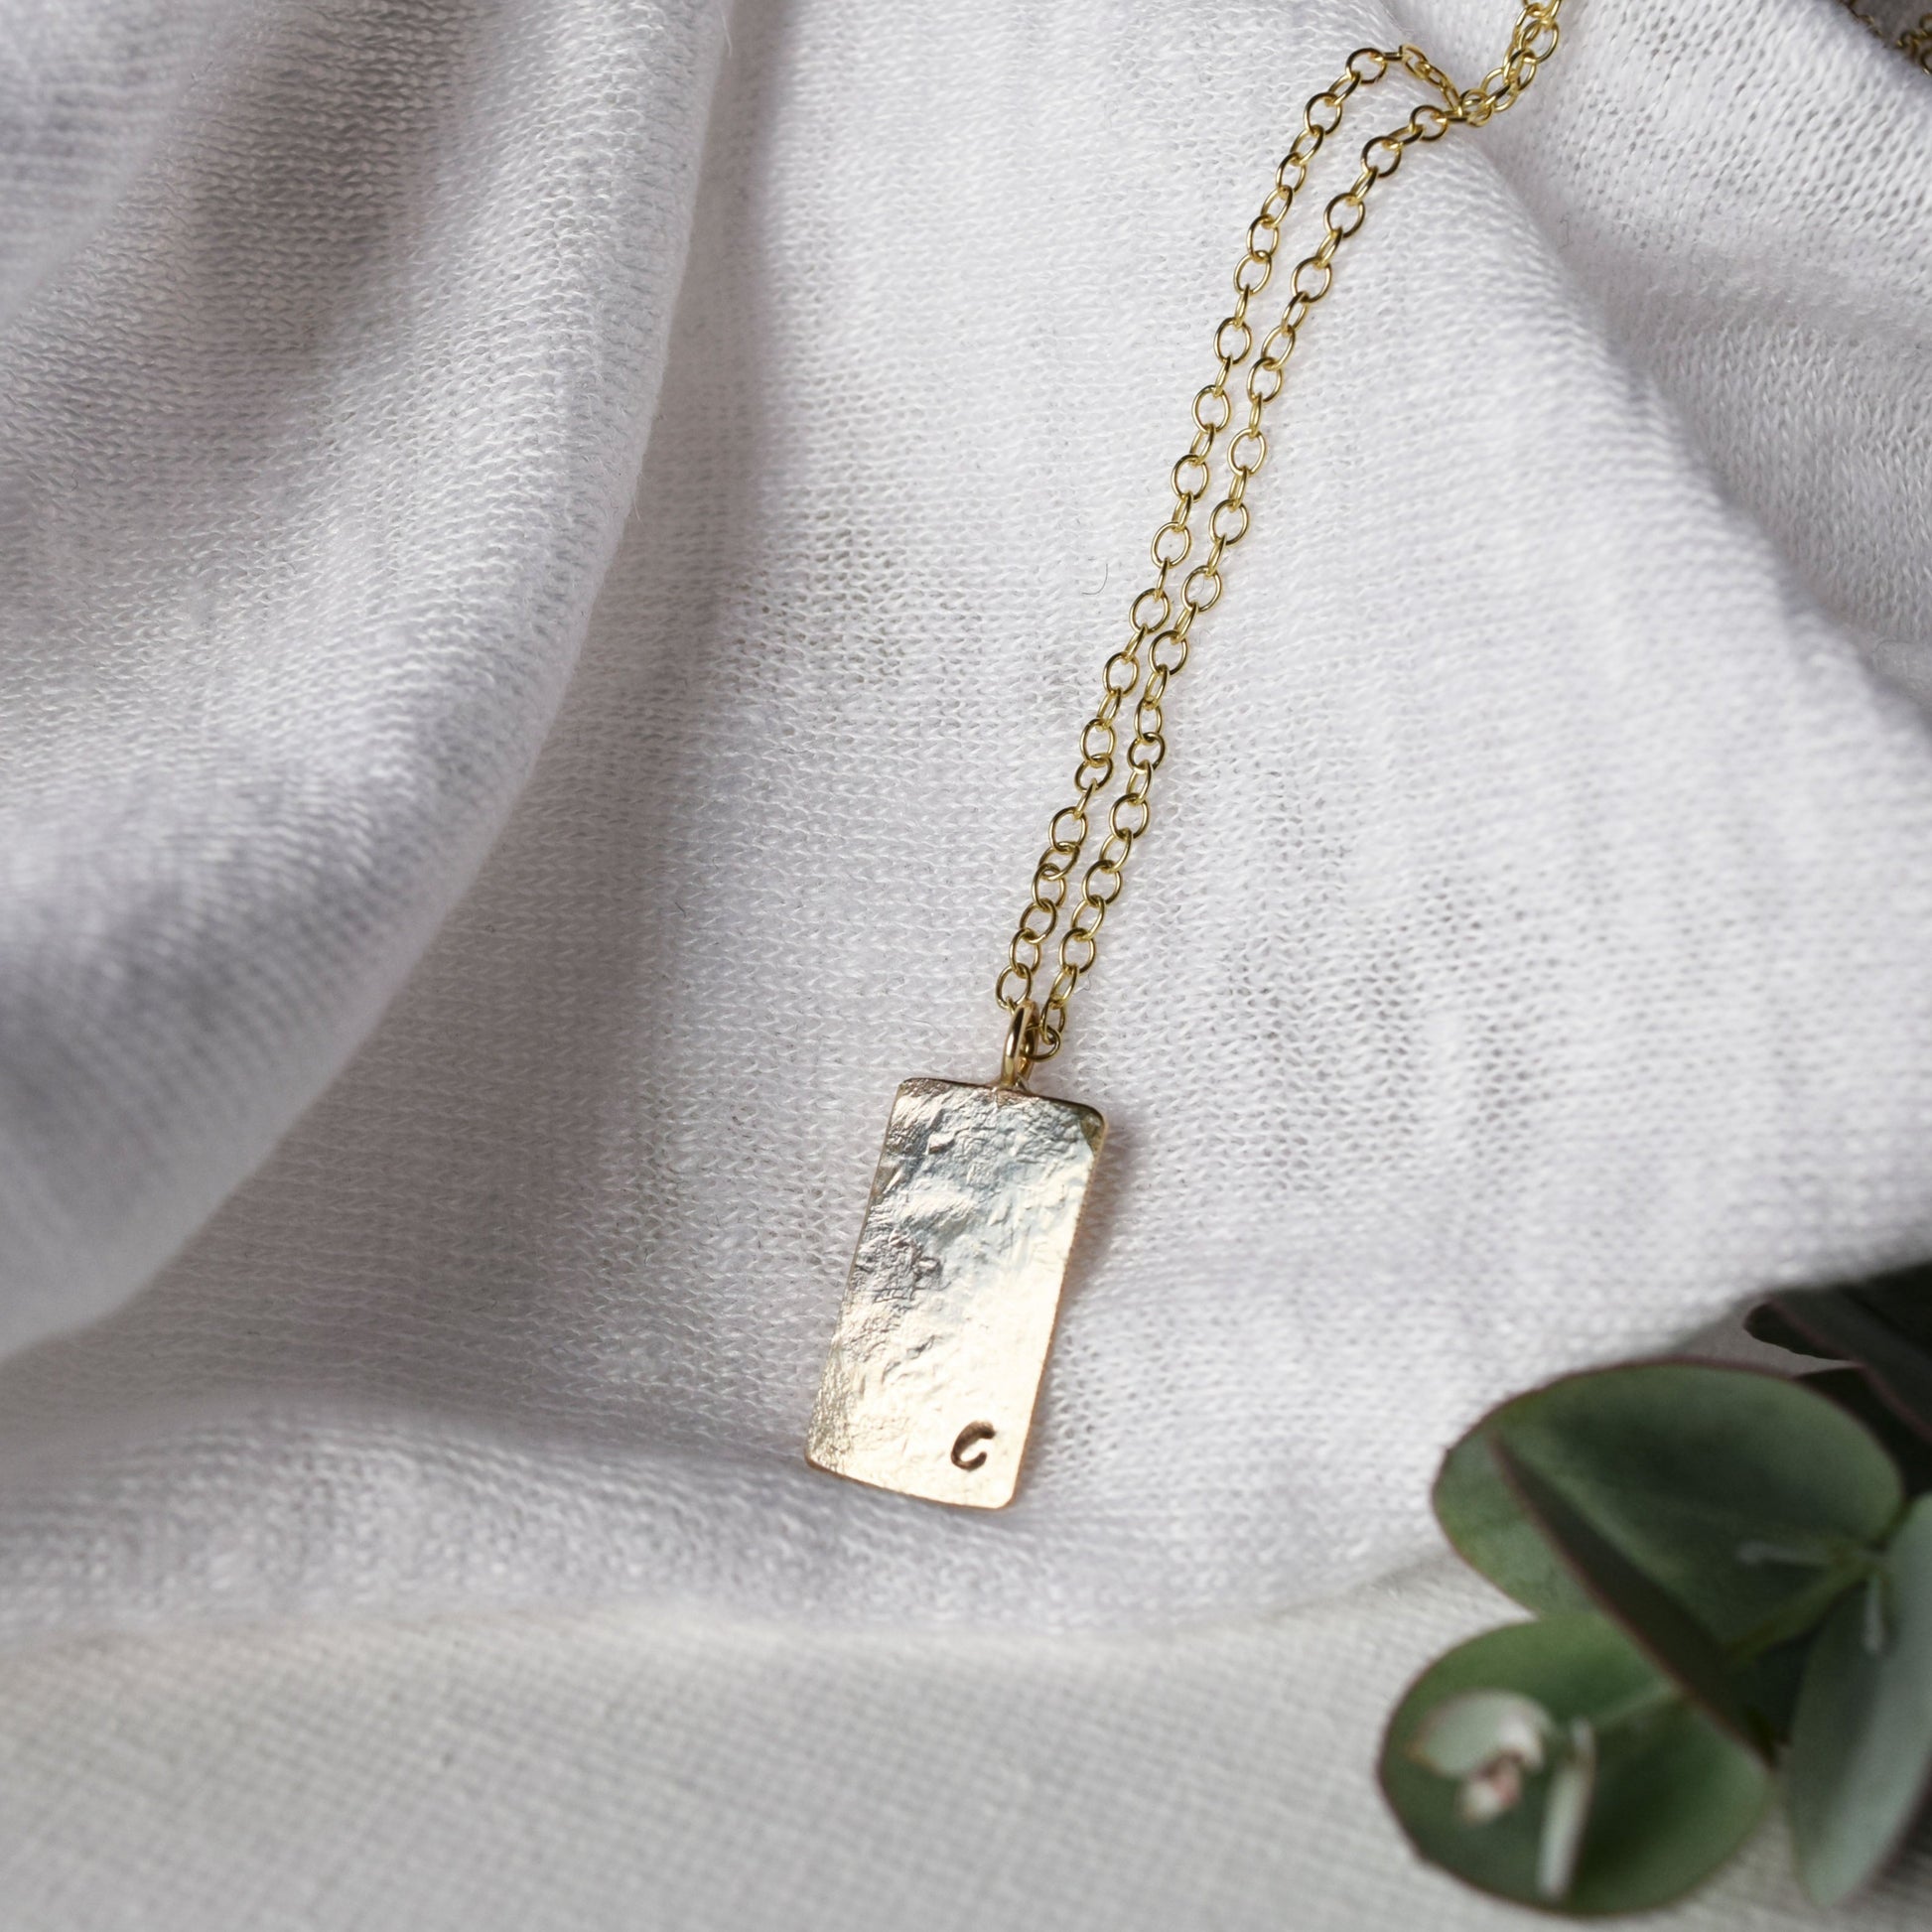 9ct gold personalised pendant necklace with initial C